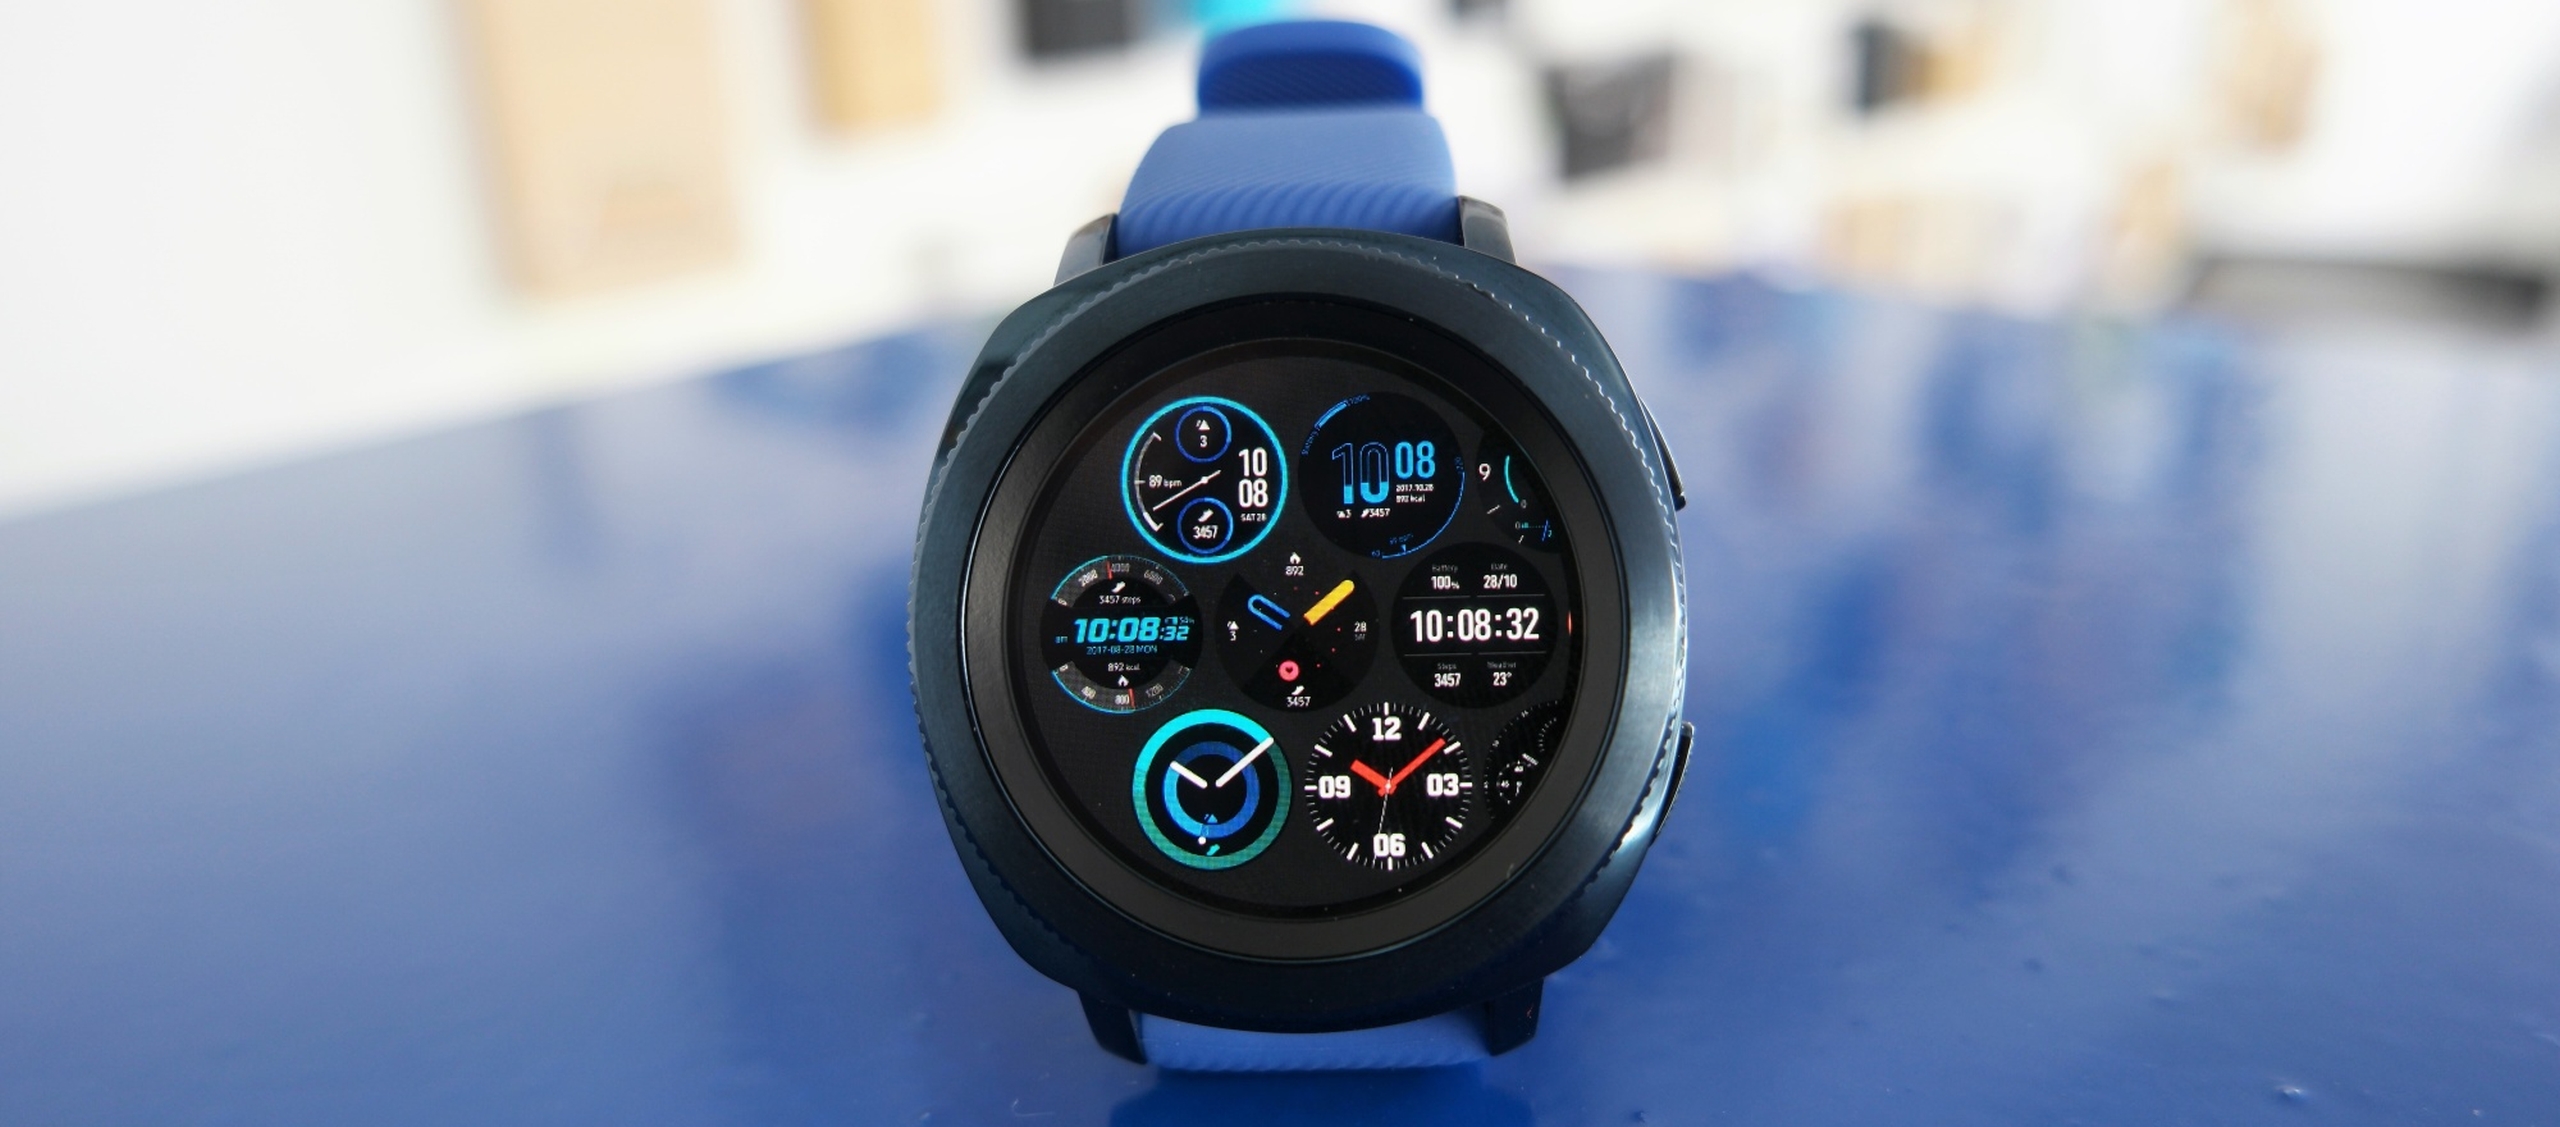 Will you keep your old Galaxy smartwatch even if it isnâ€™t updated to Wear OS? - SamMobile